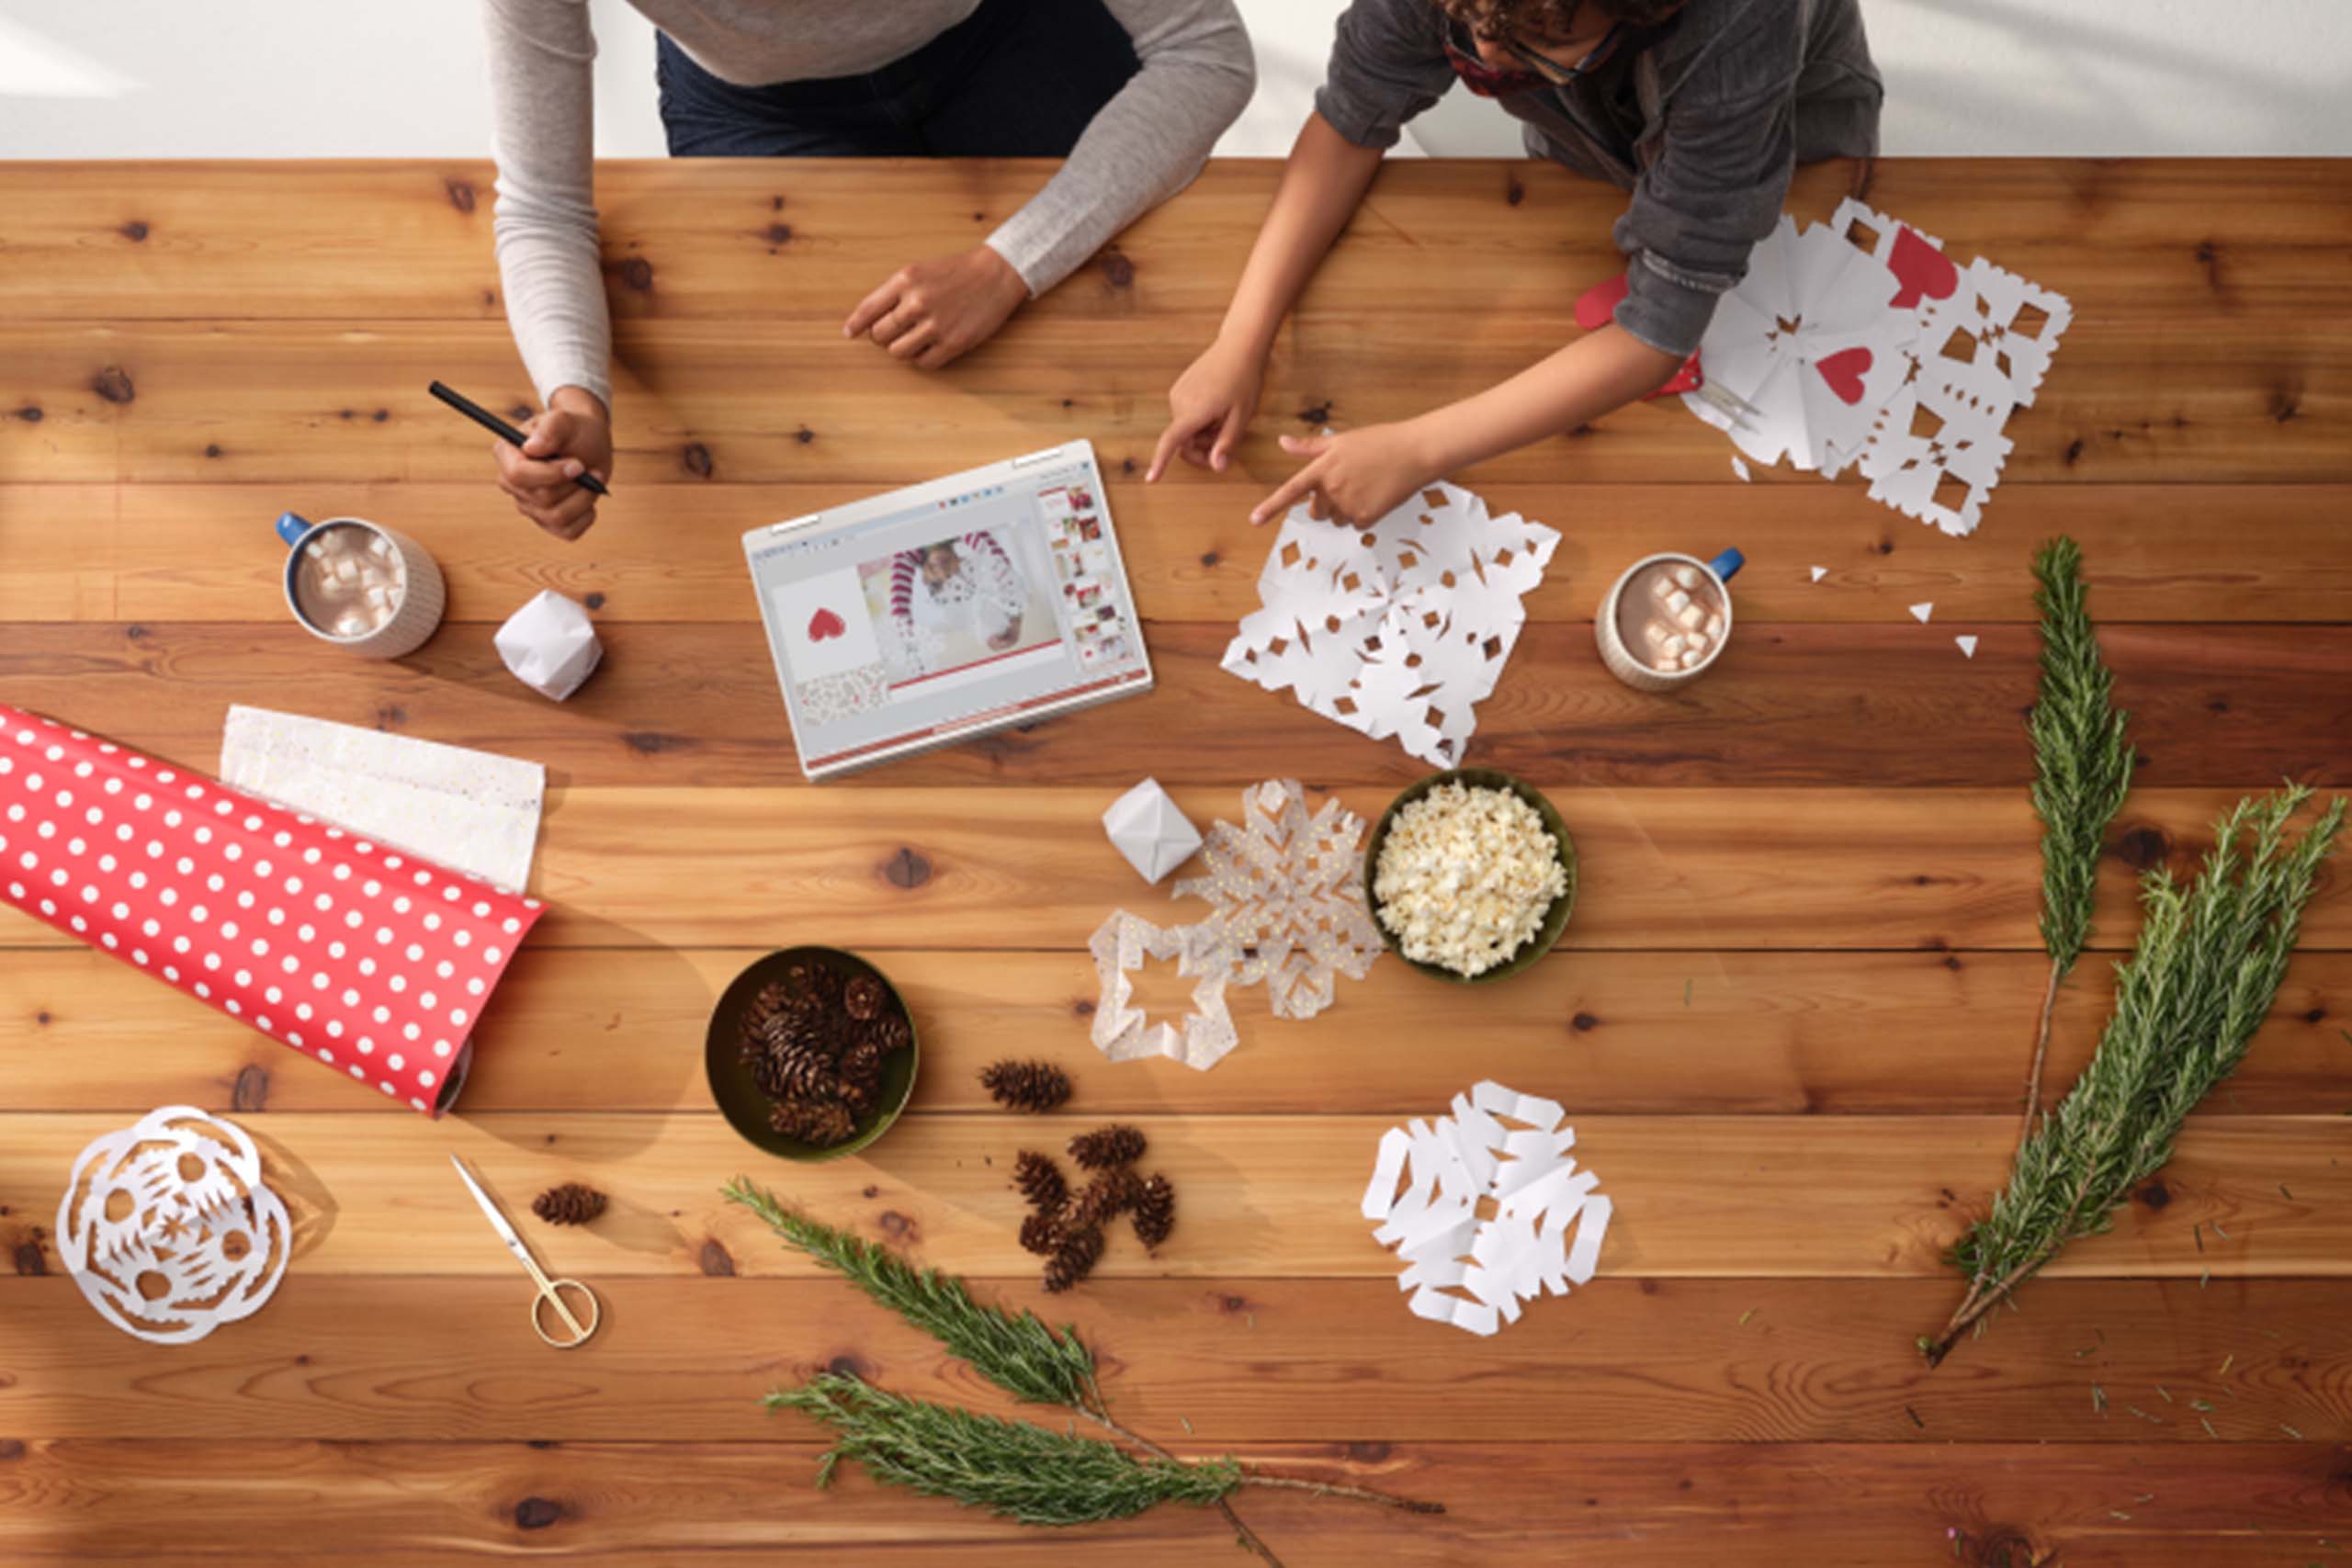 View from above of two people making paper snowflakes on a large wooden table.